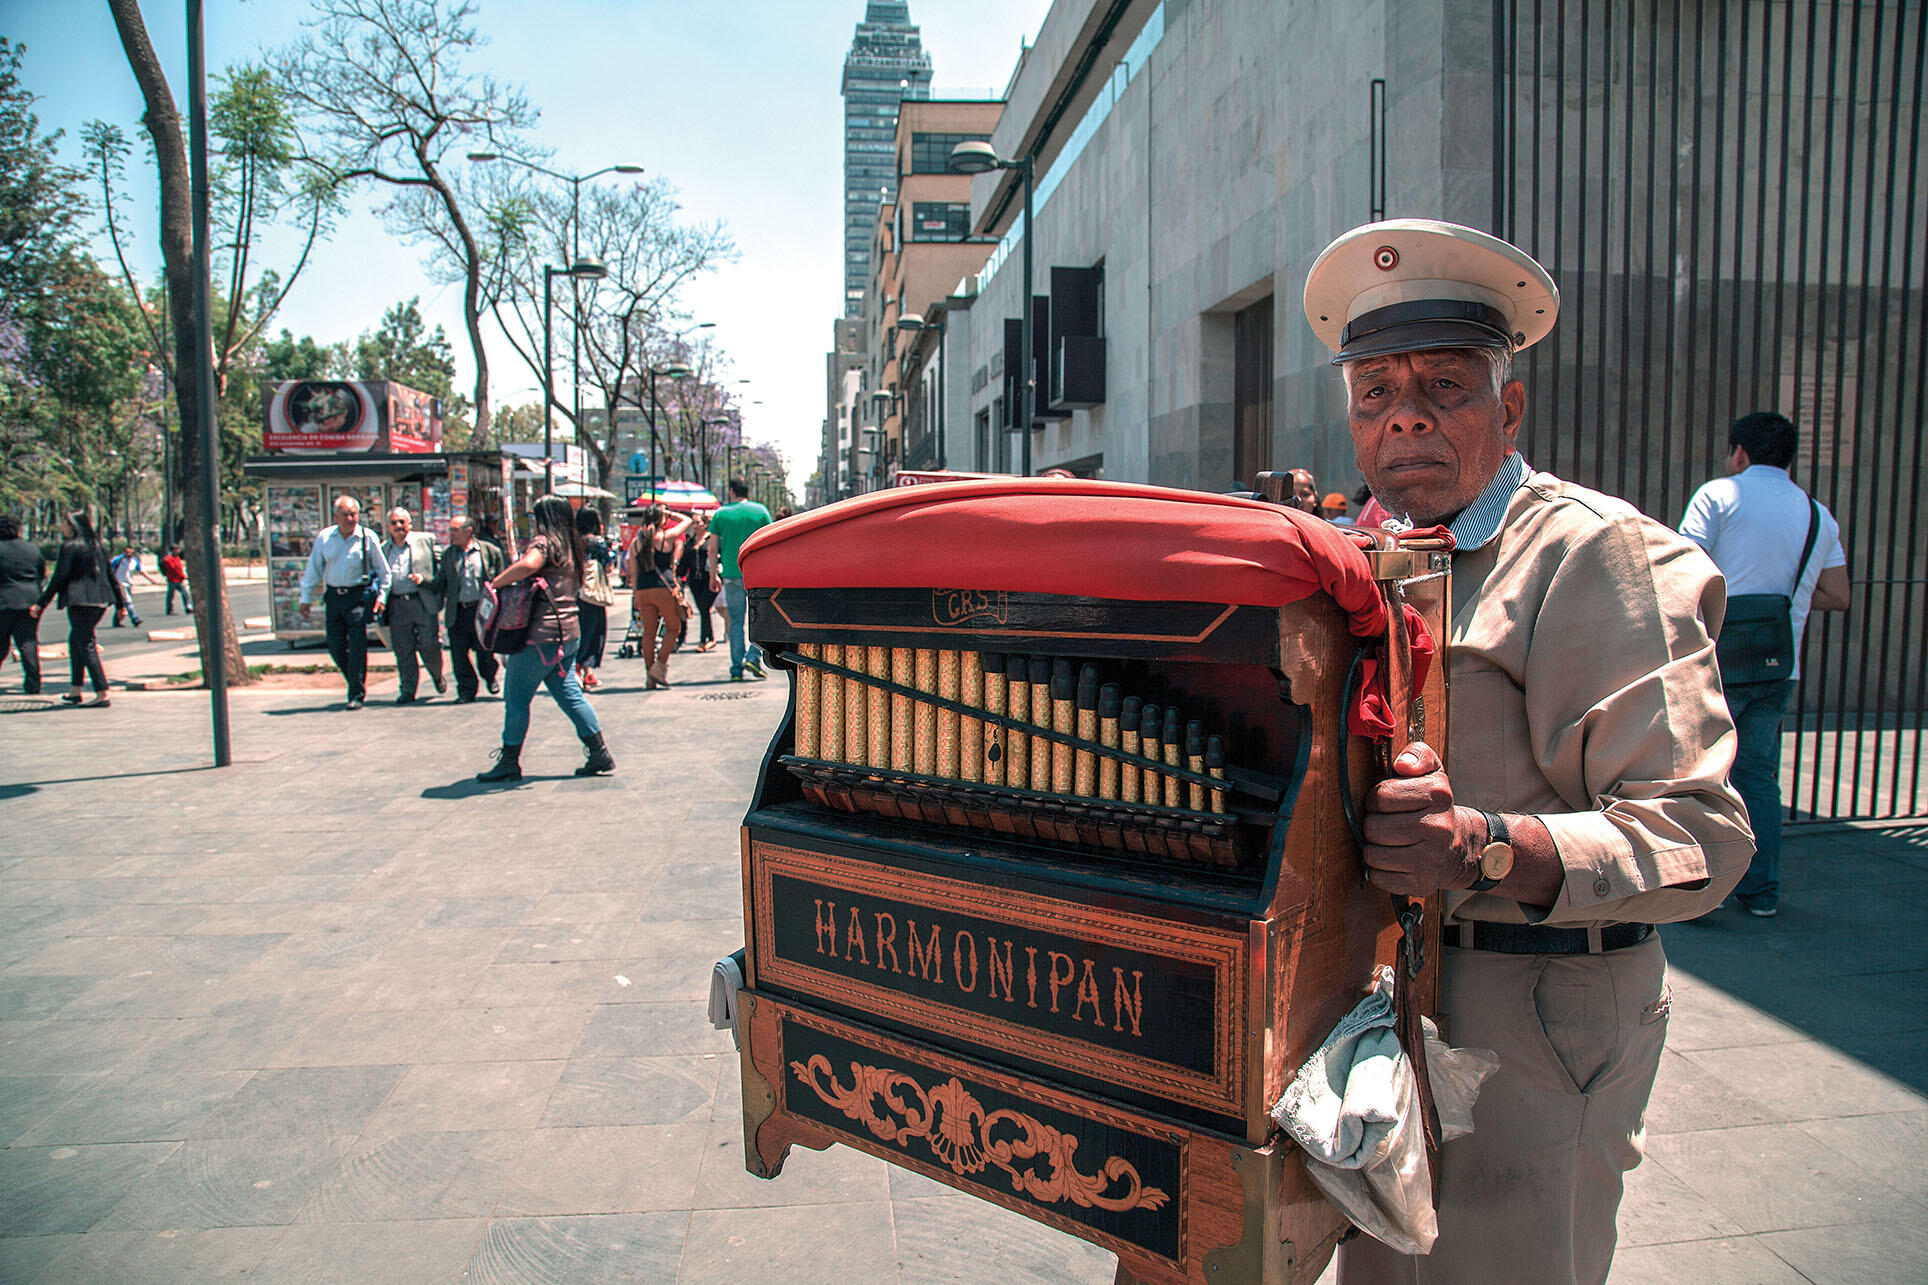 An organ grinder in the streets of Mexico City. (Photo by Israel Gonzalez.)